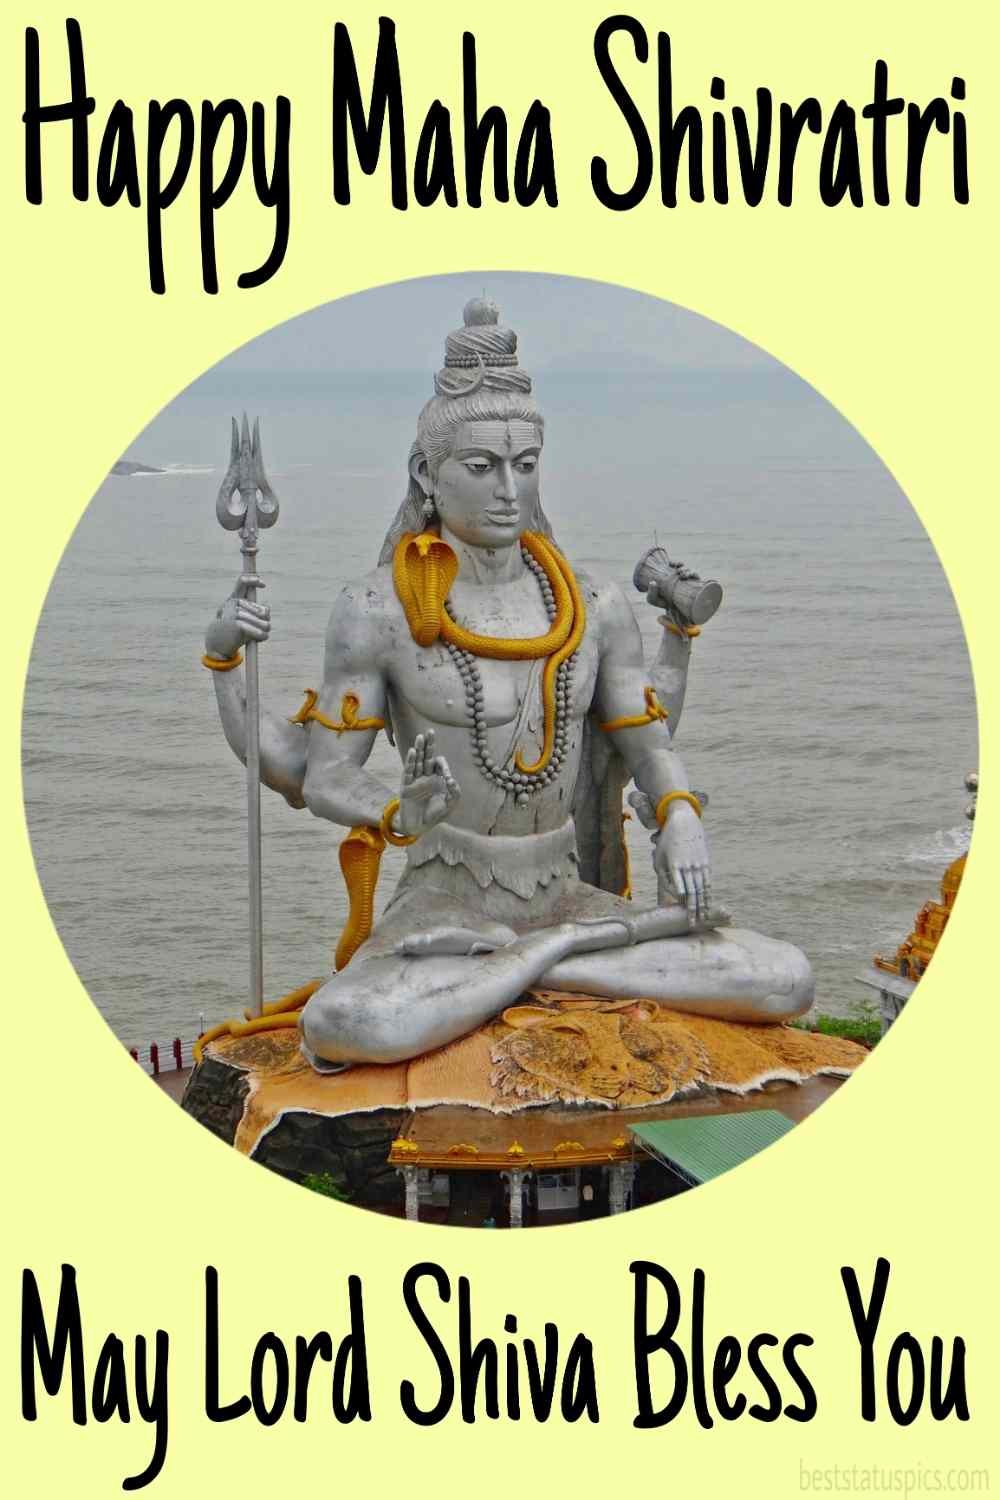 Happy Maha Shivratri 2022 wishes and pictures for friends